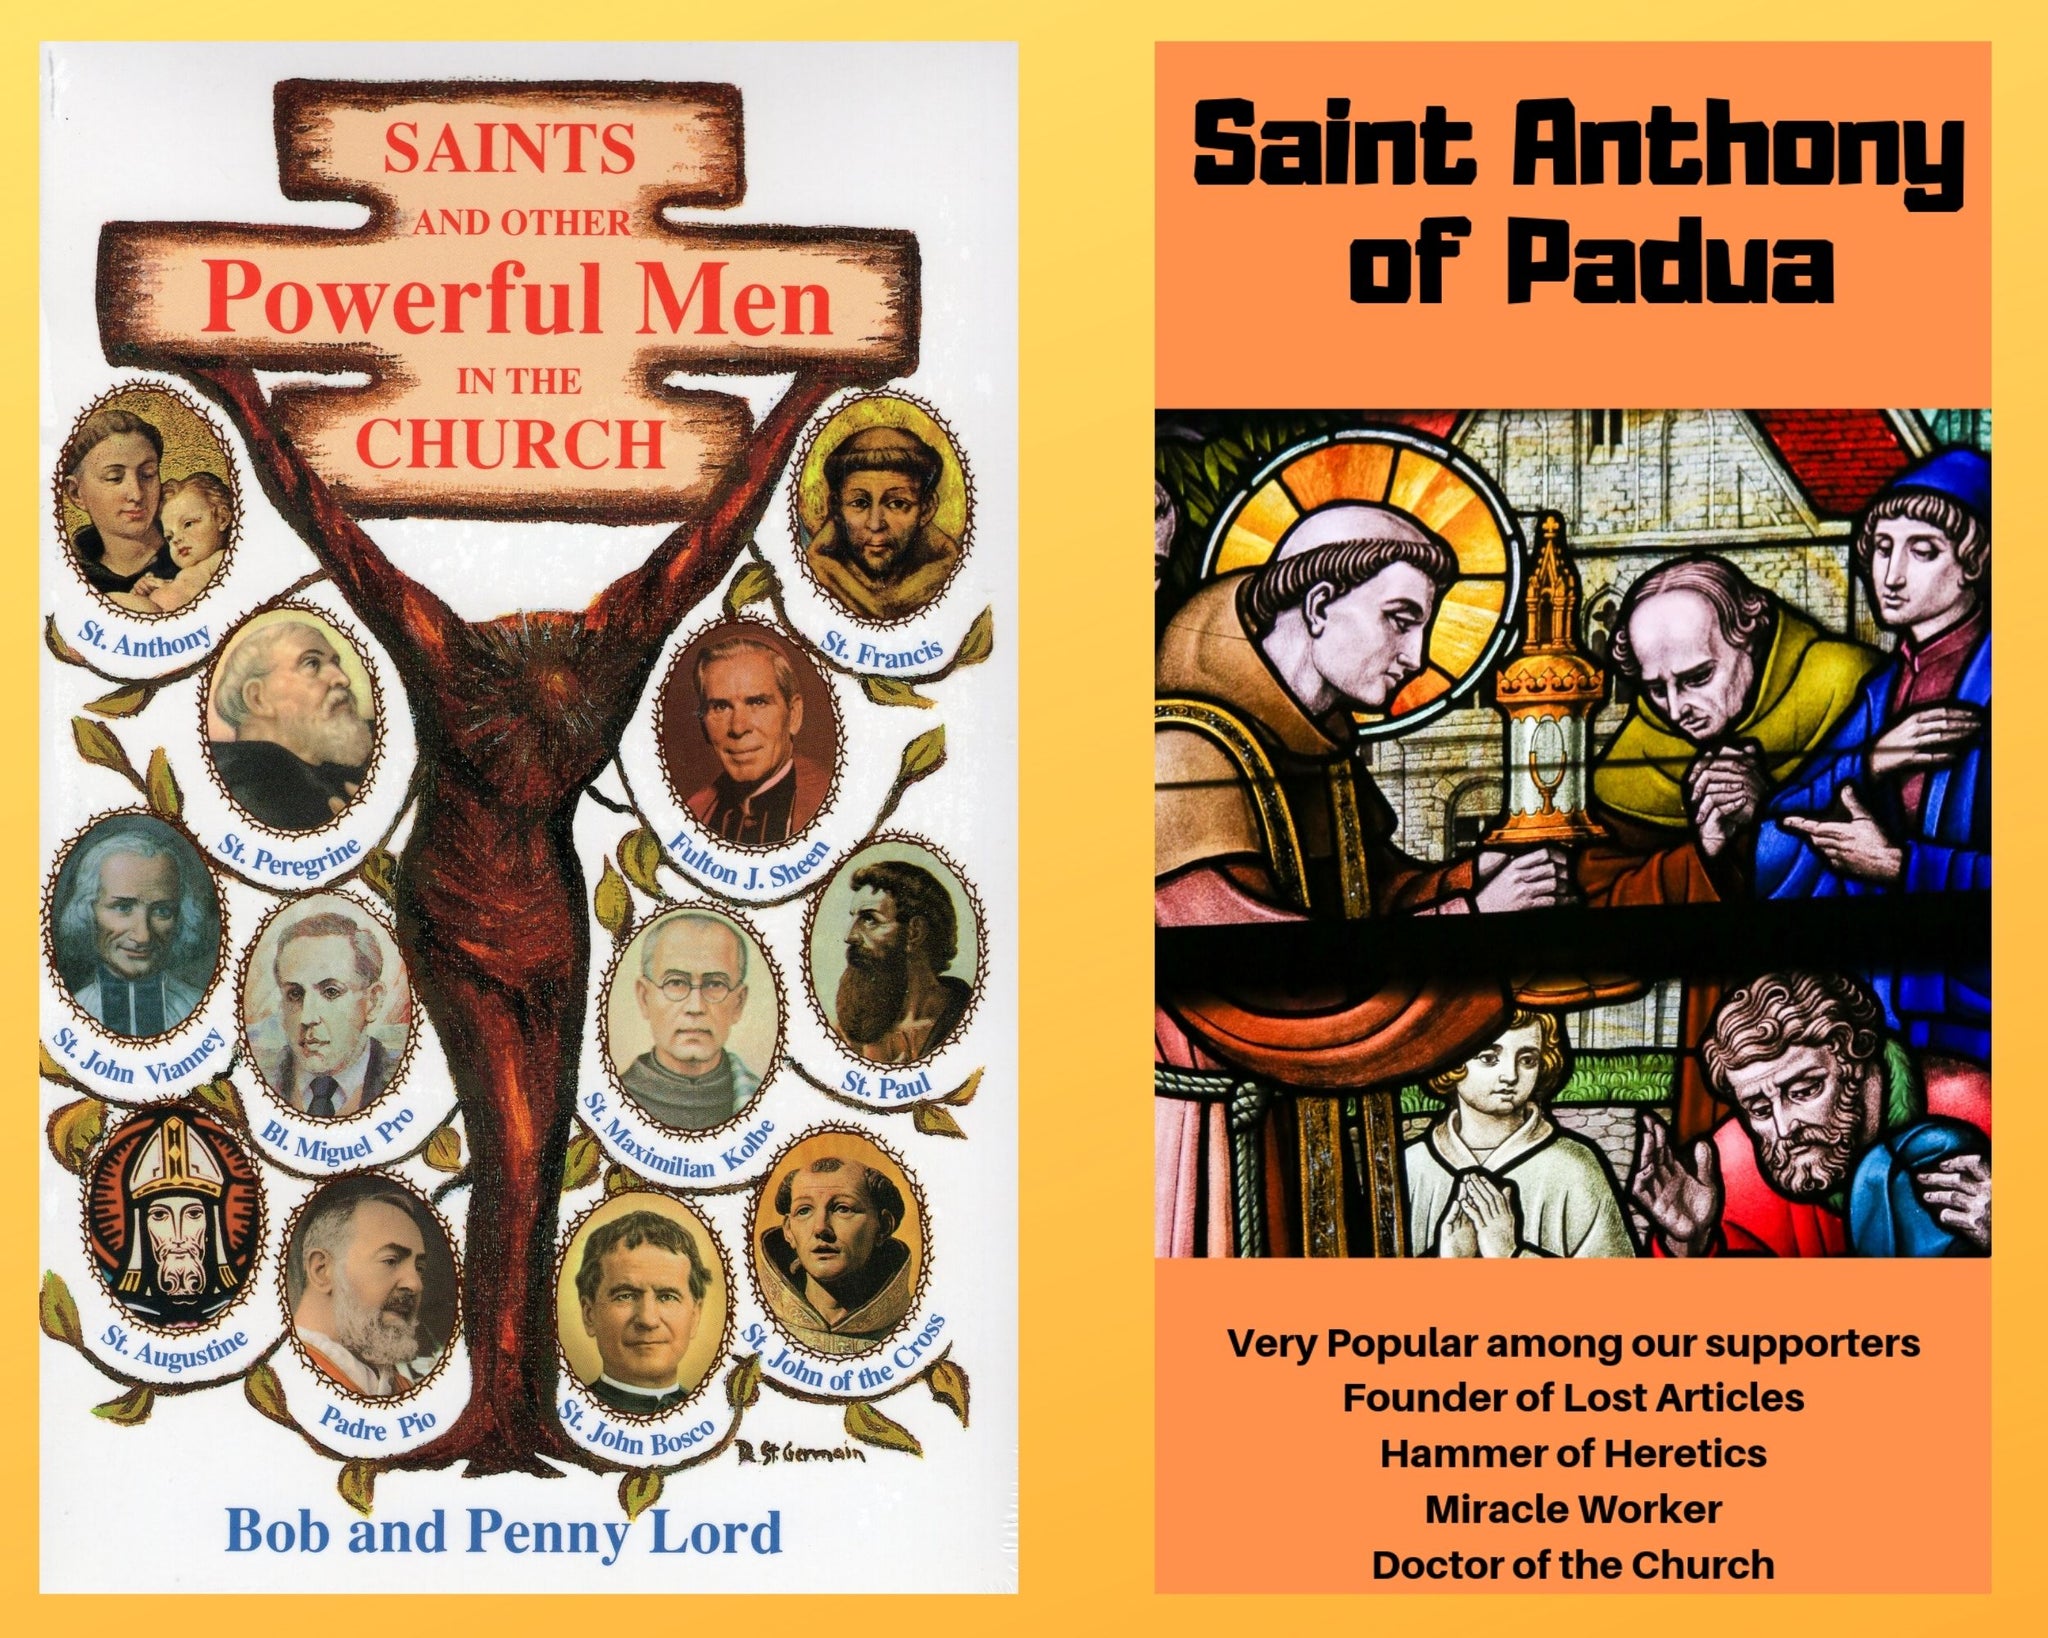 Saints and Other Powerful Men Book and Companion Saint Anthony of Padua DVD - Bob and Penny Lord